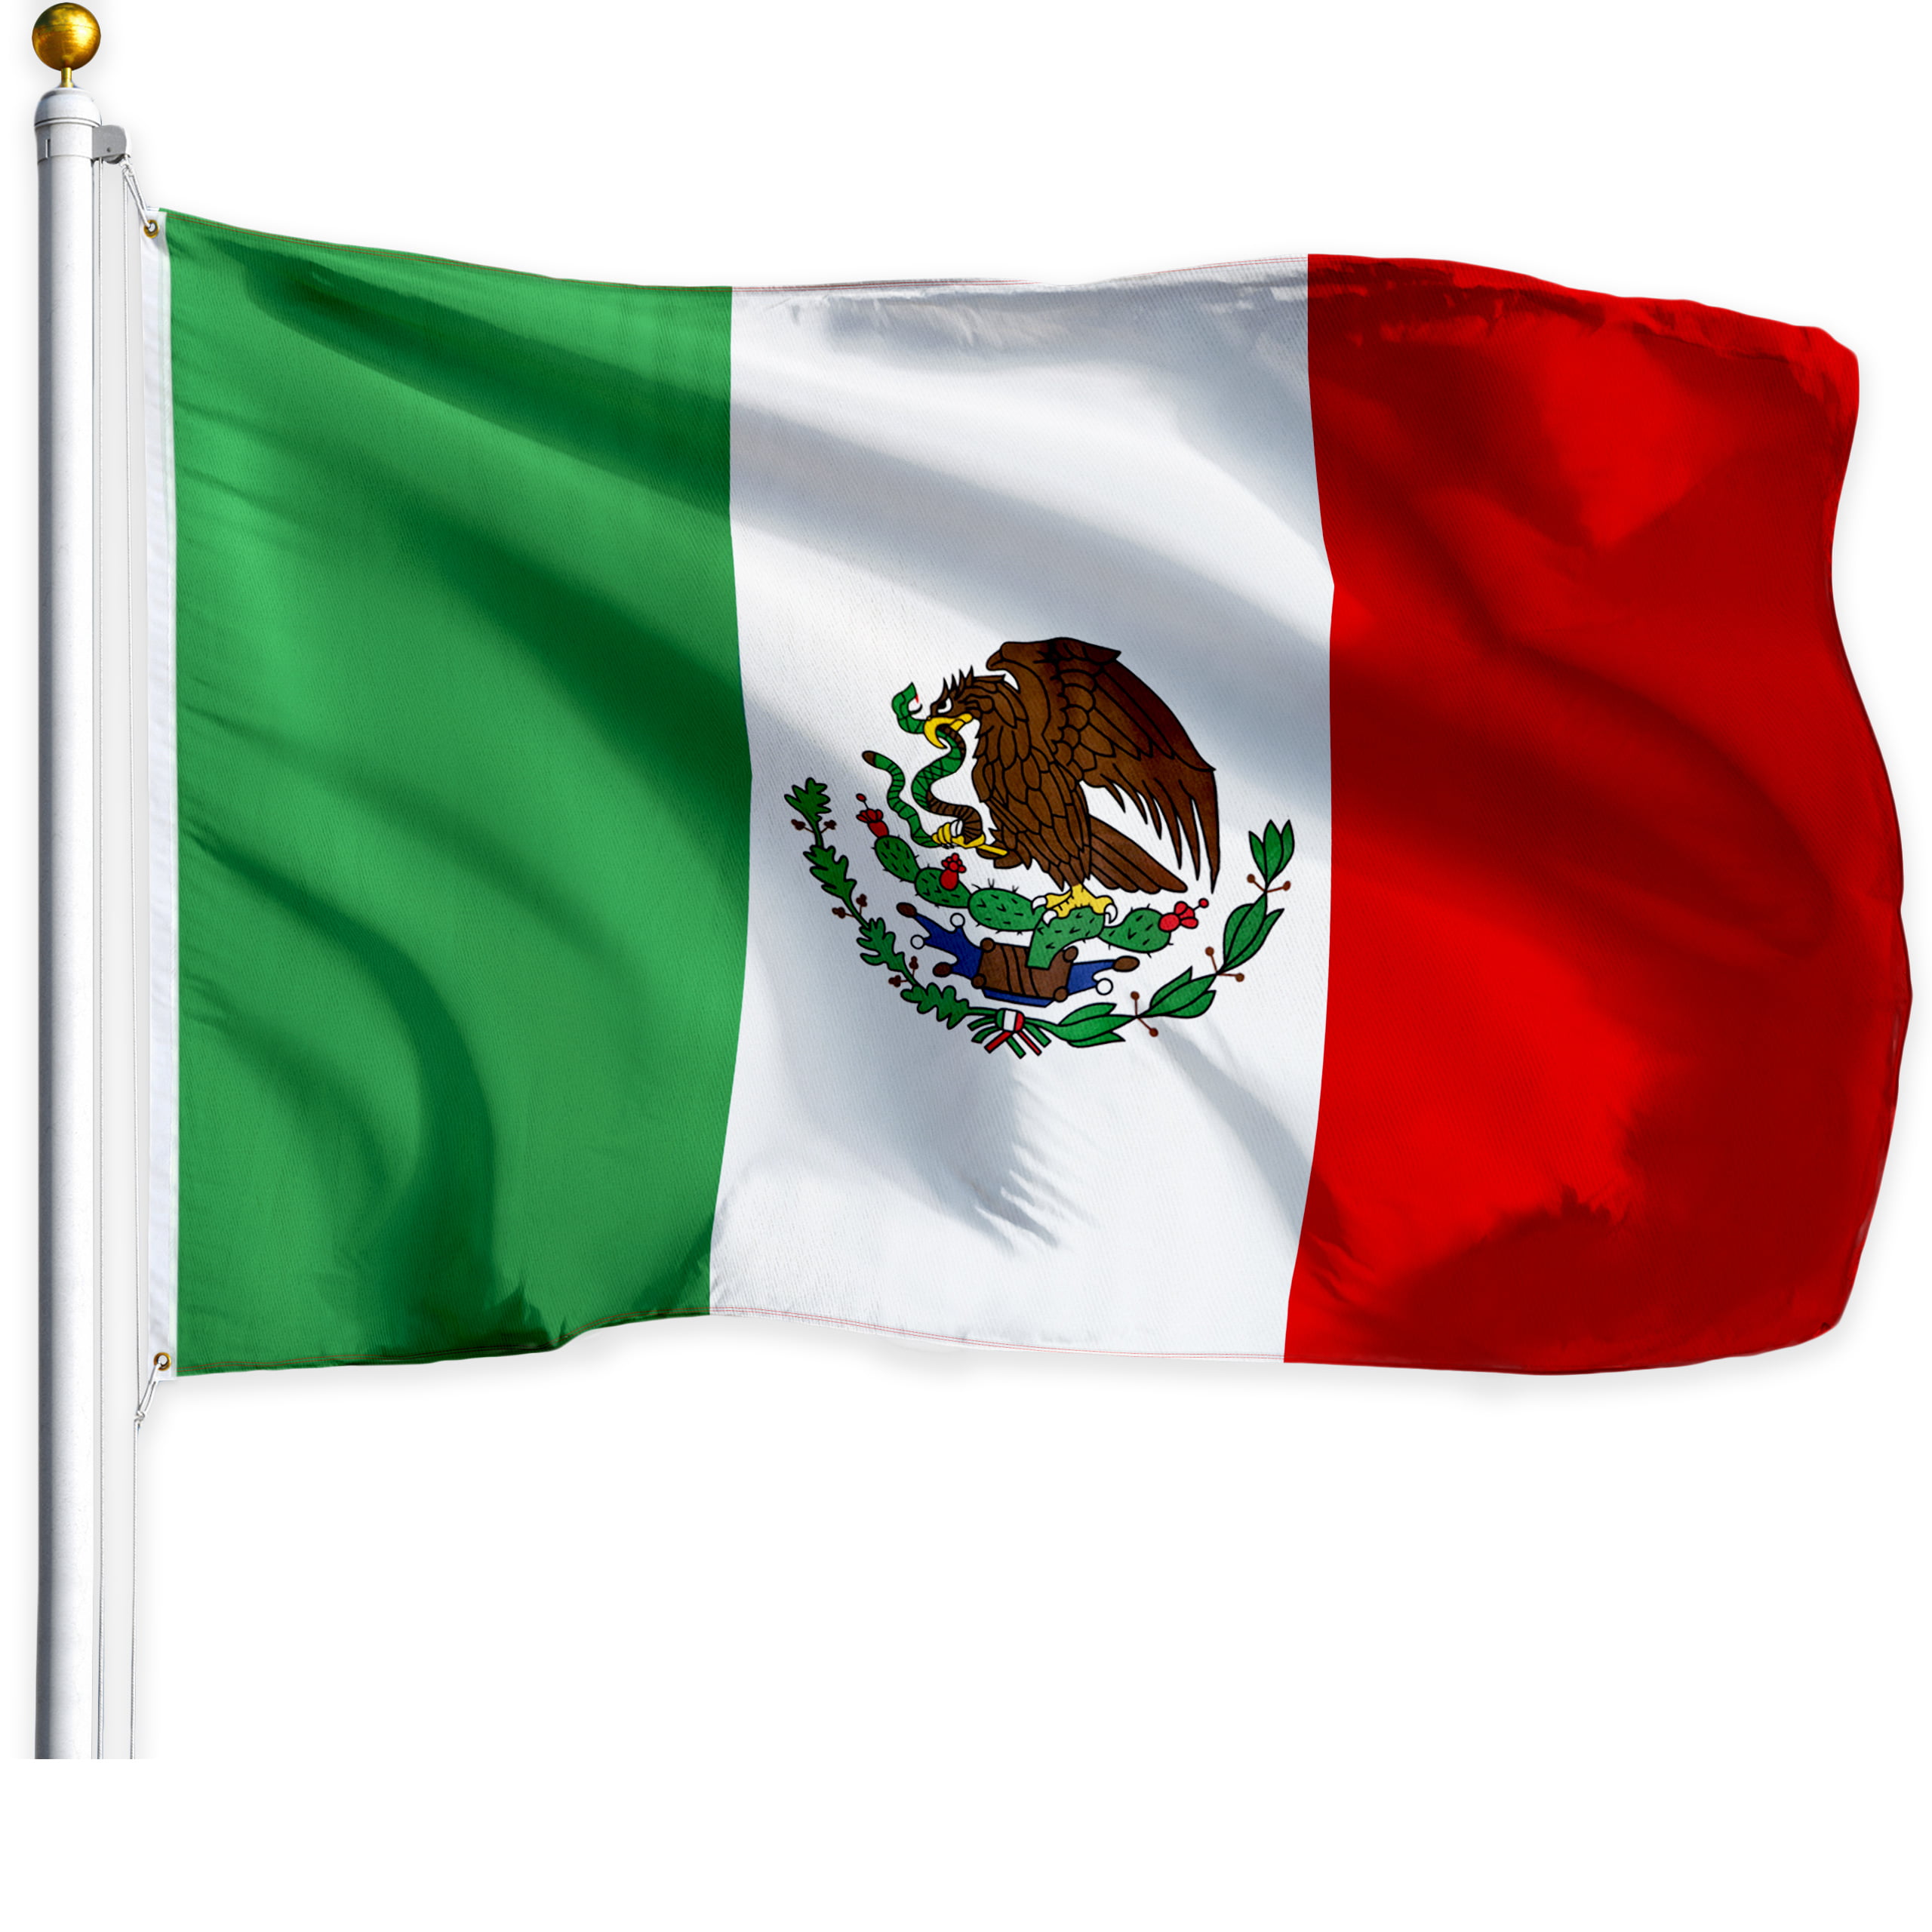 3' x 5' ft Flag Mexico Indoor Outdoor Country Mexican Yard w/ Grommets Feet 